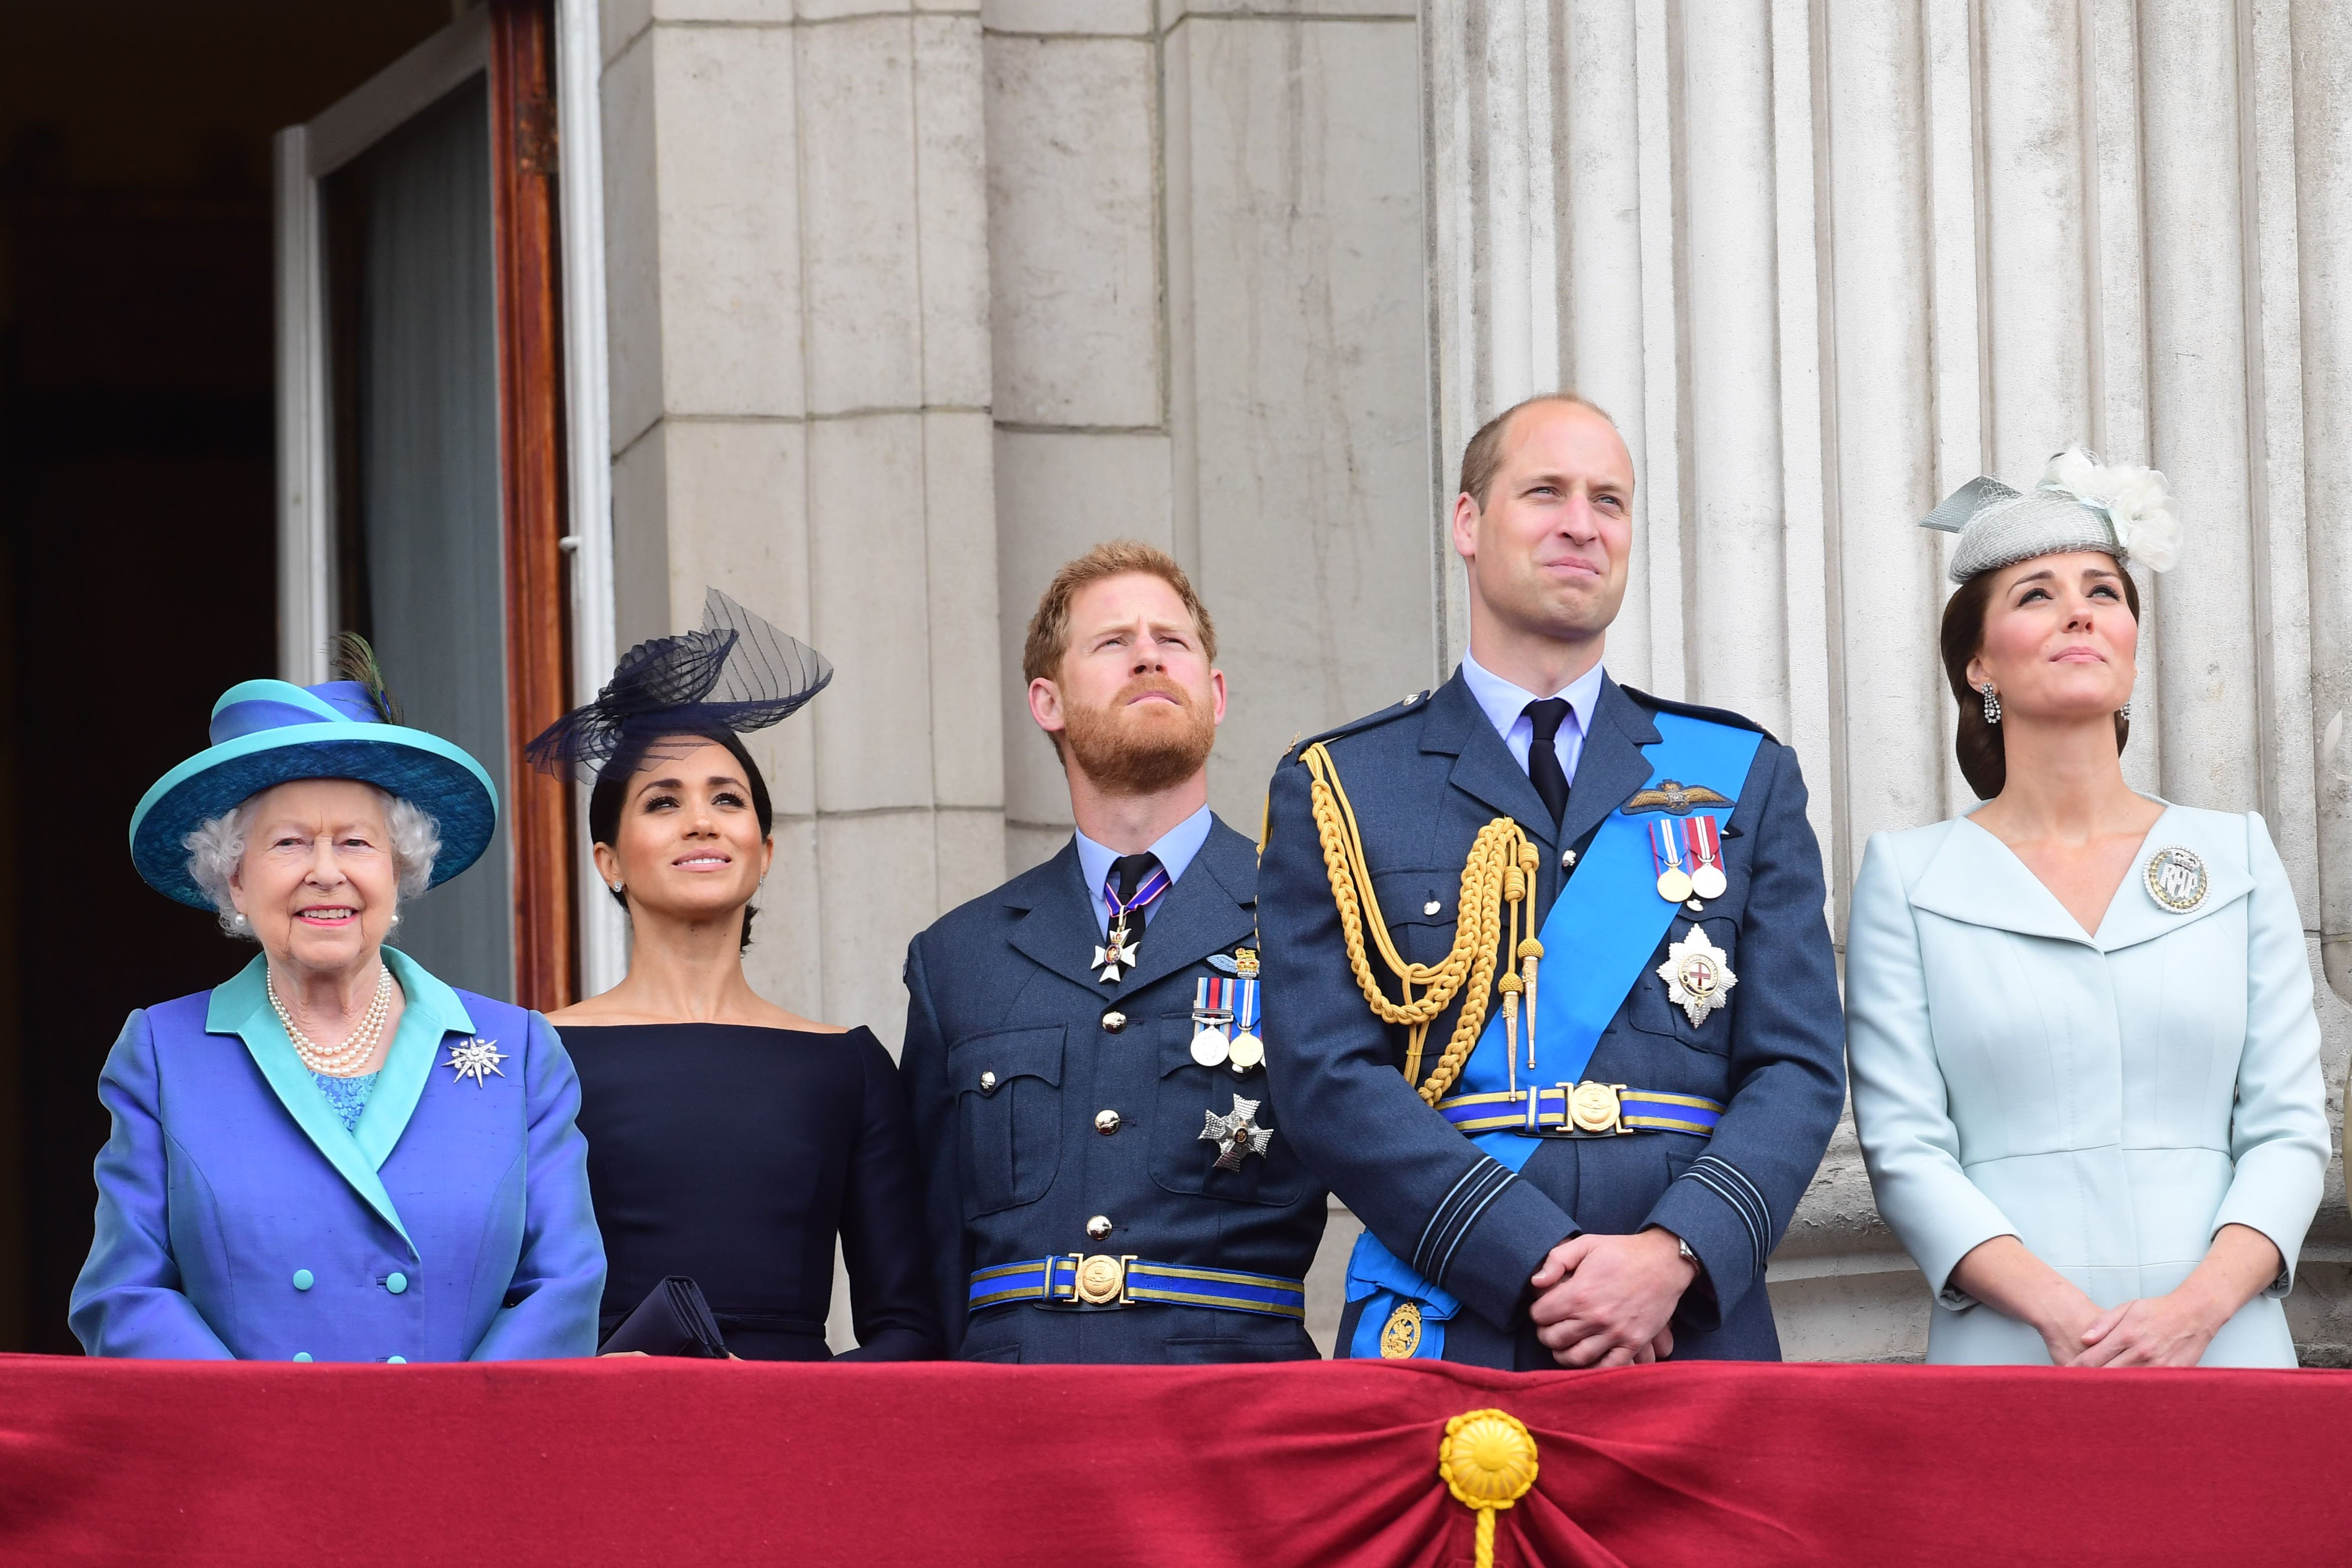 Queen Elizabeth II, Meghan, Duchess of Sussex, Prince Harry, Duke of Sussex, Prince William, Prince of Wales and Catherine, Prince of Wales watch the RAF 100th anniversary flypast from the balcony of Buckingham Palace on July 10, 2018 in London, England. | Source: Getty Images